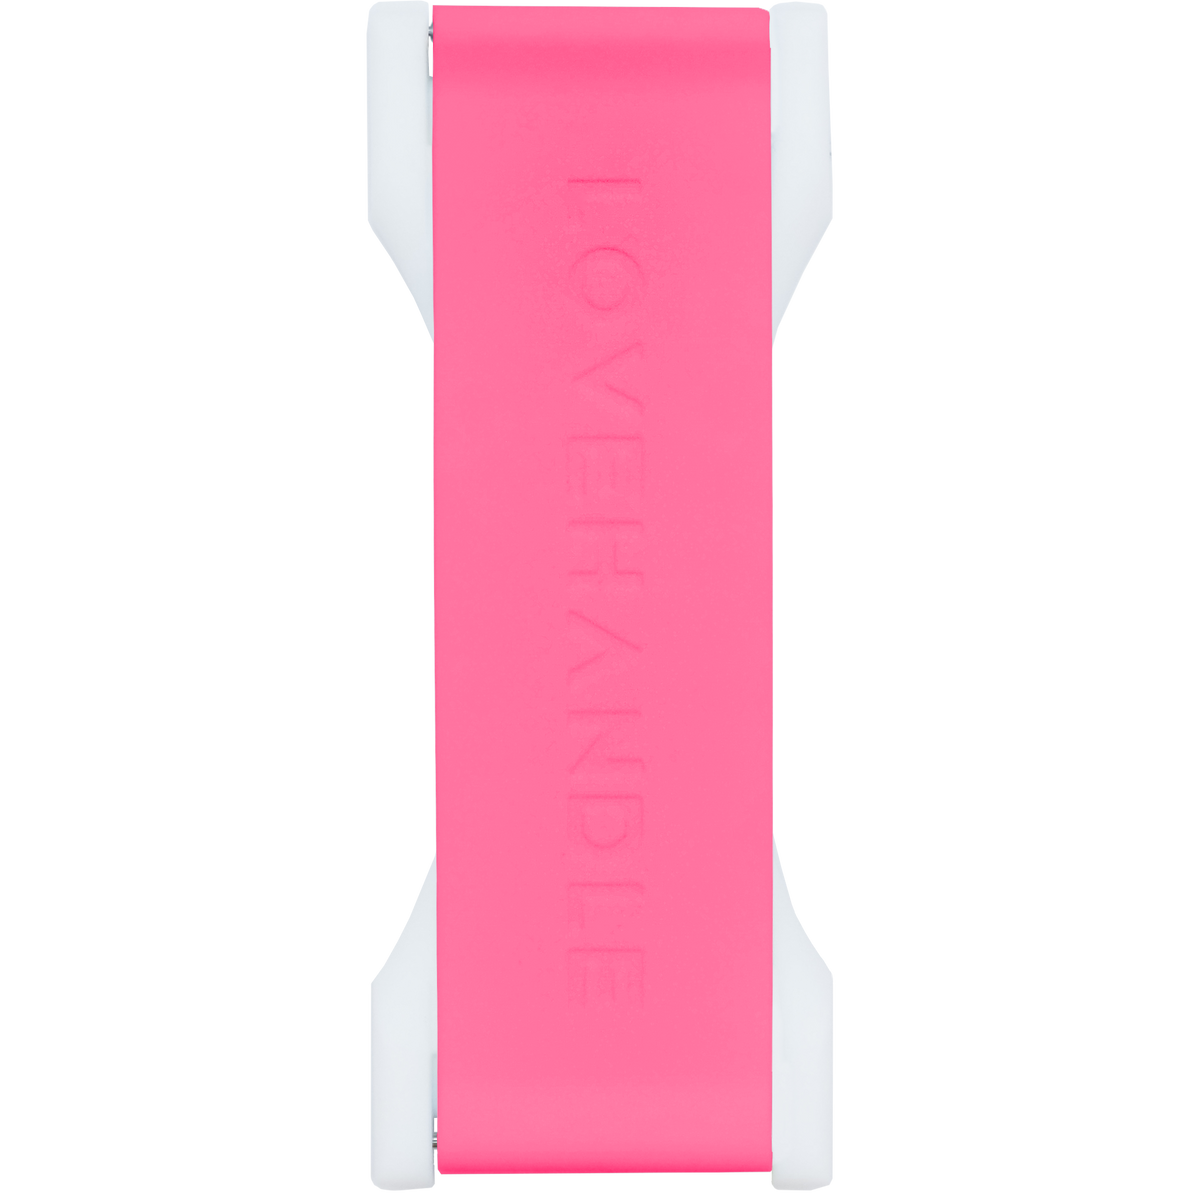 LoveHandle PRO Silicone Phone Grip - Hot Pink White Base